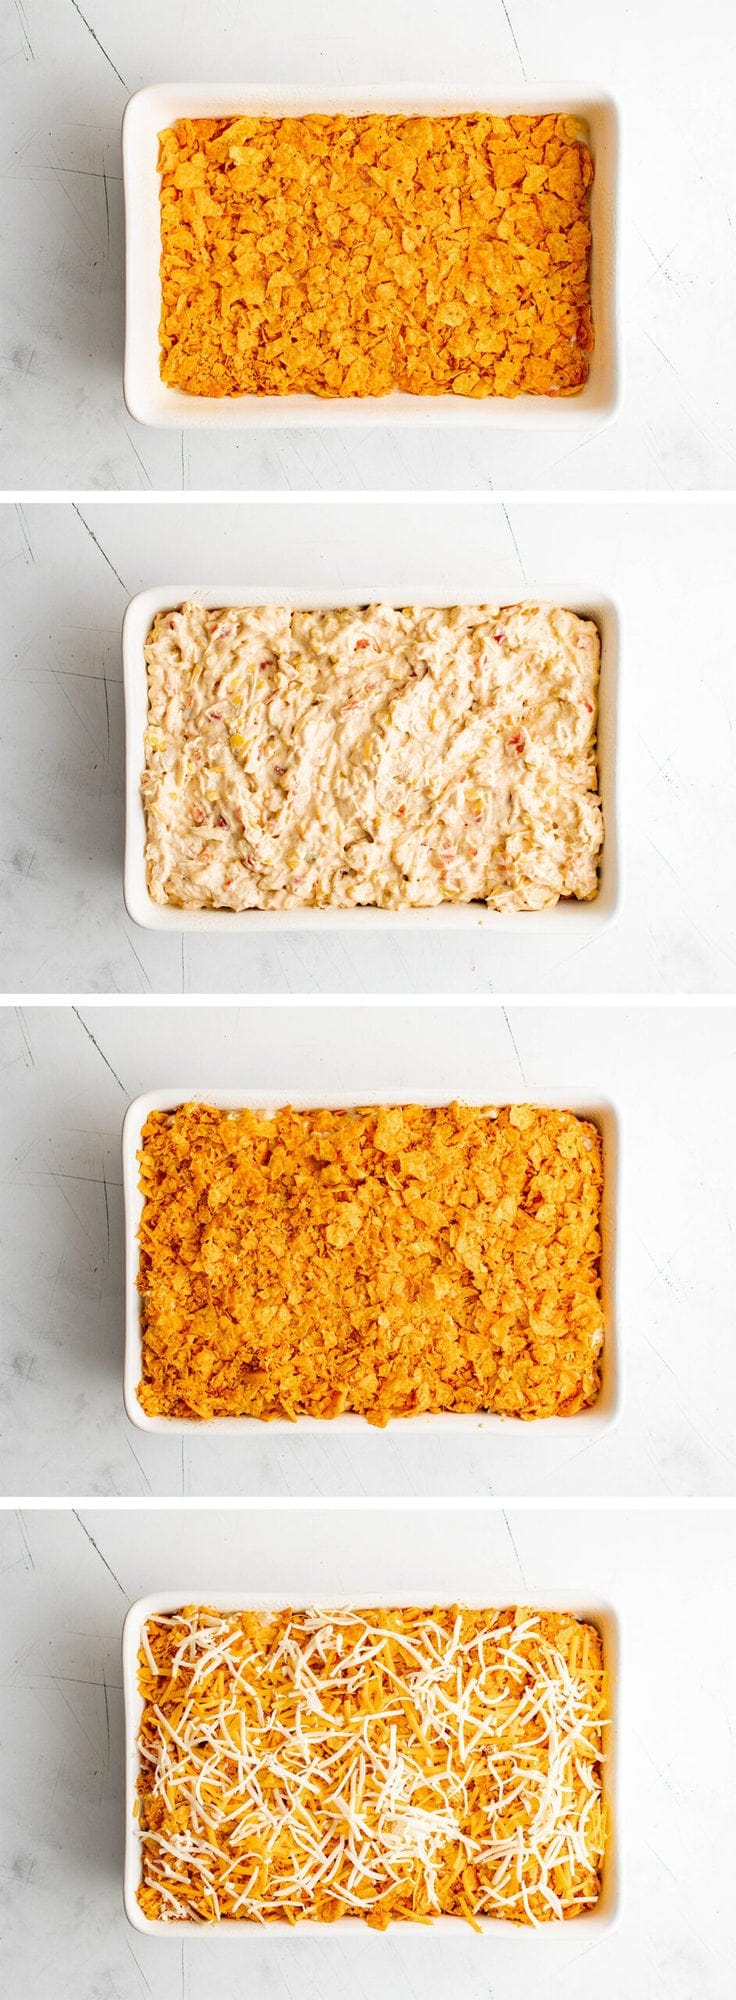 collage of images showing how to layer a chicken casserole with doritos